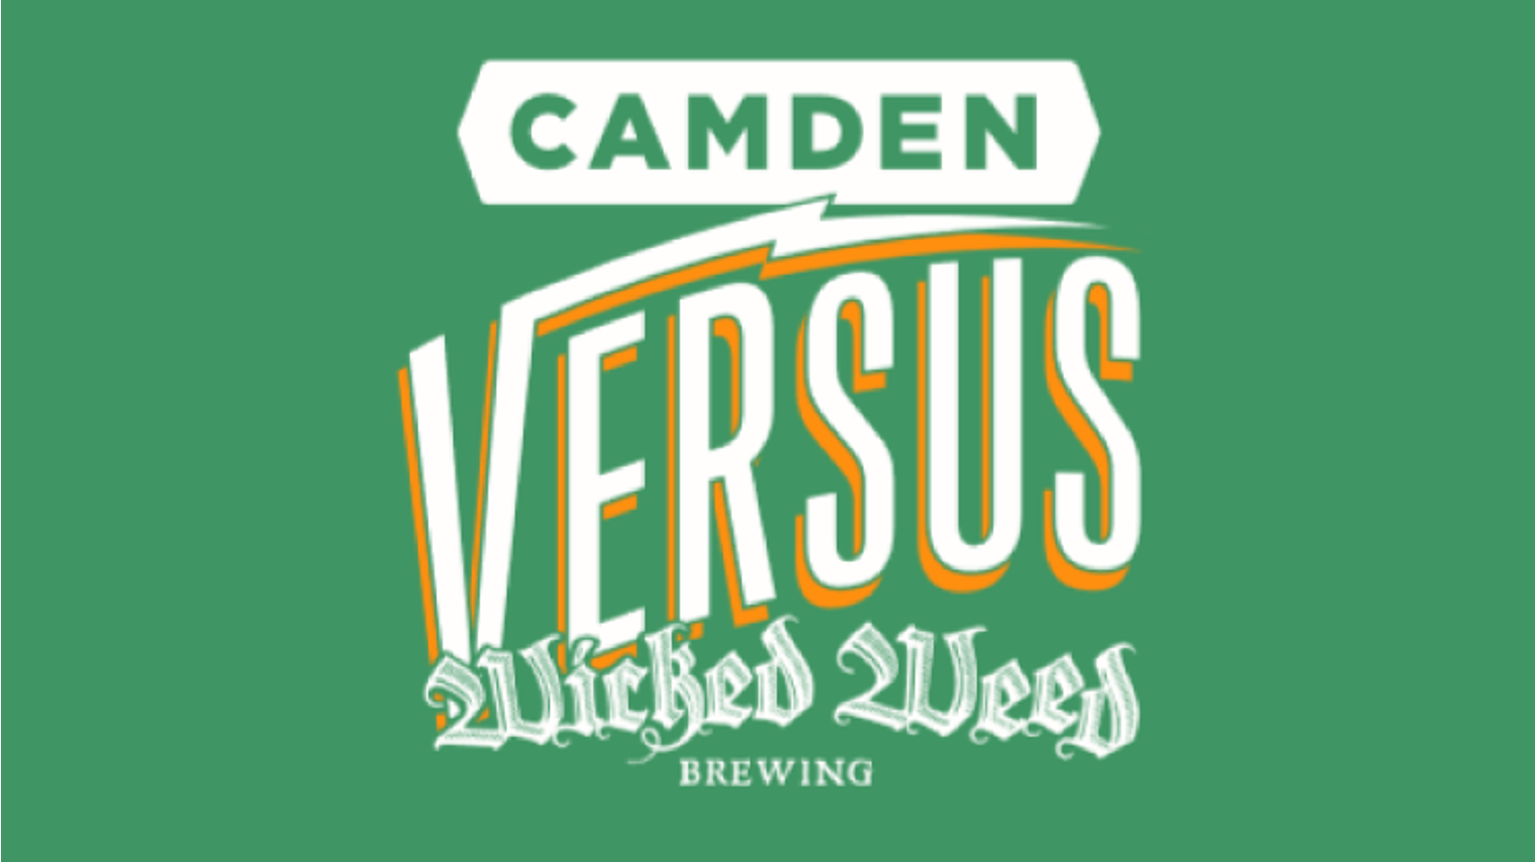 thumbnail for blog article named: Beery Christmas Giorno 7: Camden & Wicked Weed Versus IPA